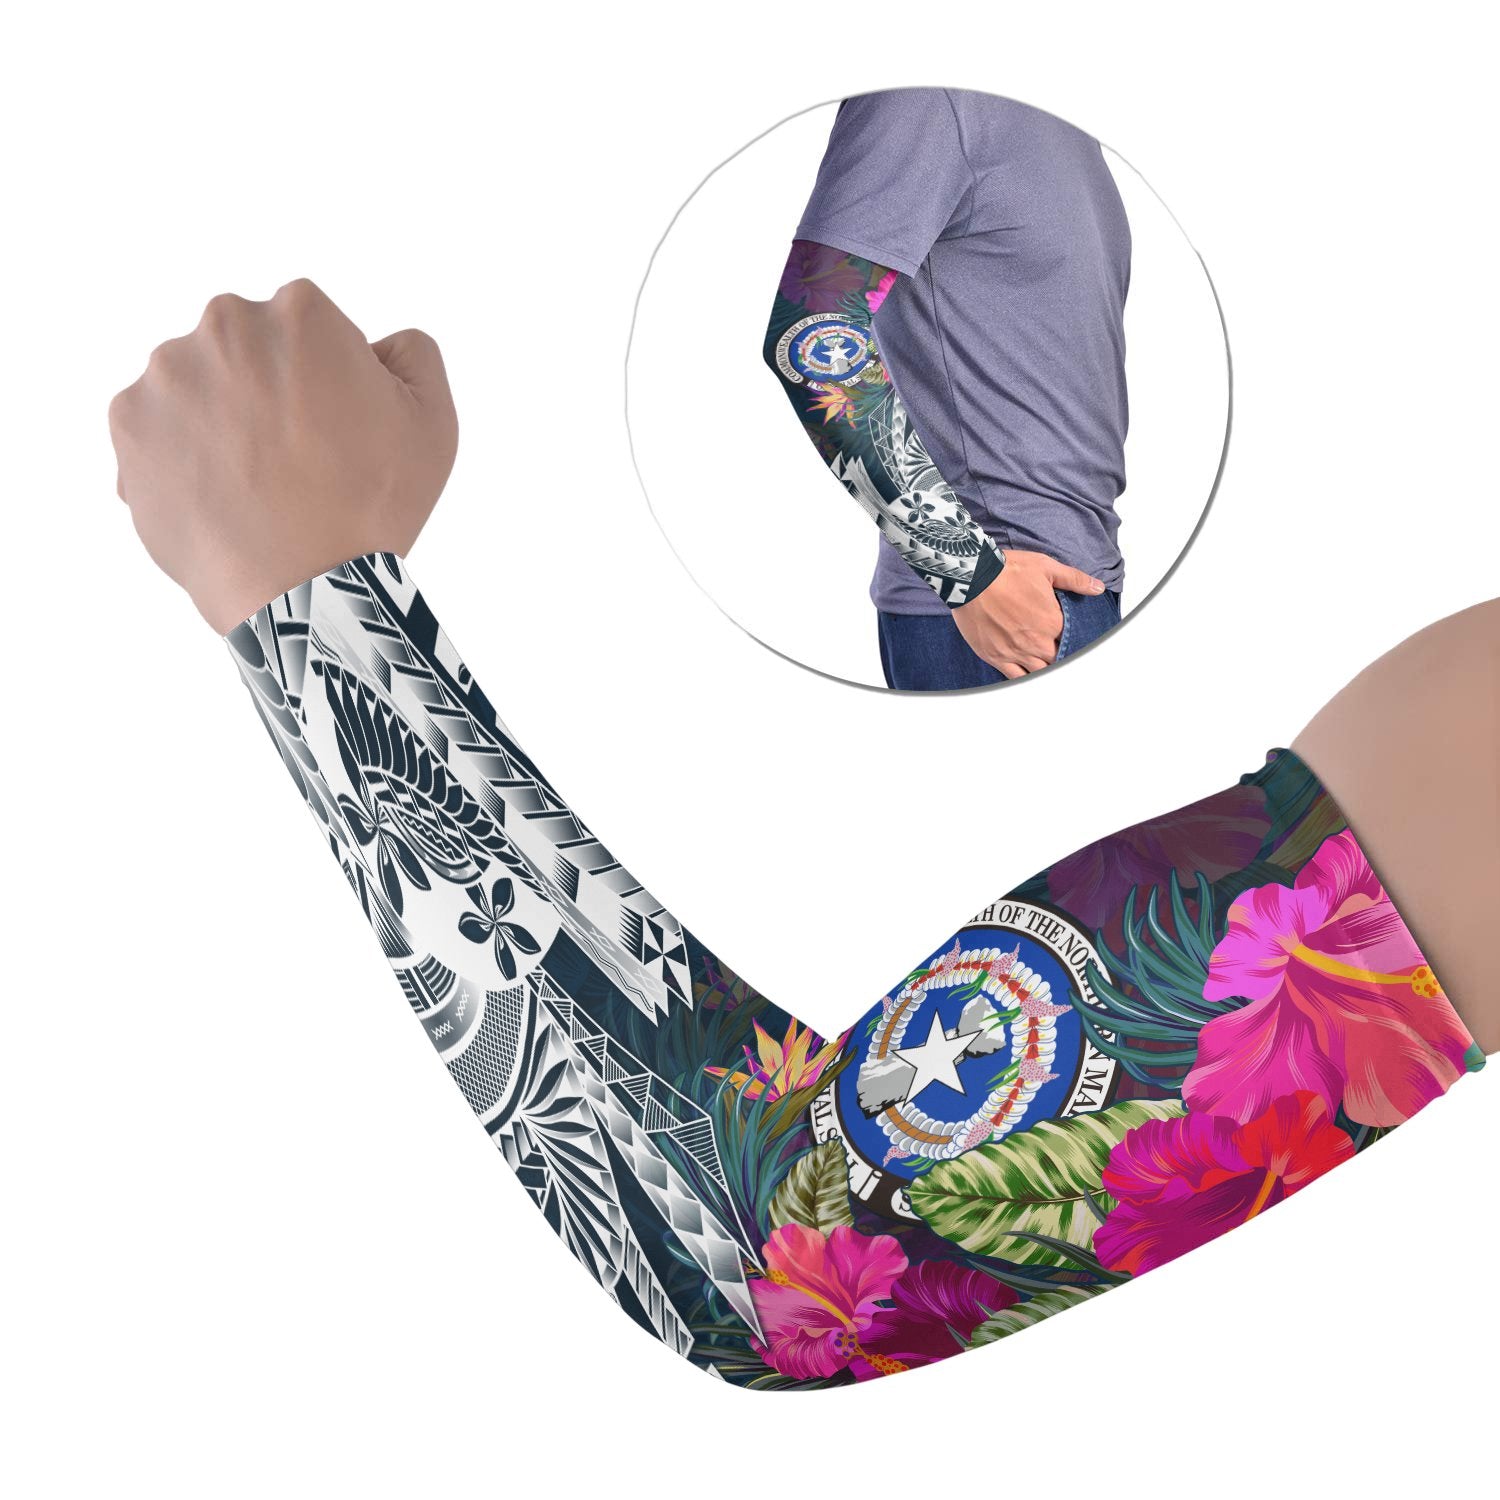 Commonwealth of the Northern Mariana Islands Arm Sleeve (Set of 2) - Summer Vibes Set of 2 Black - Polynesian Pride